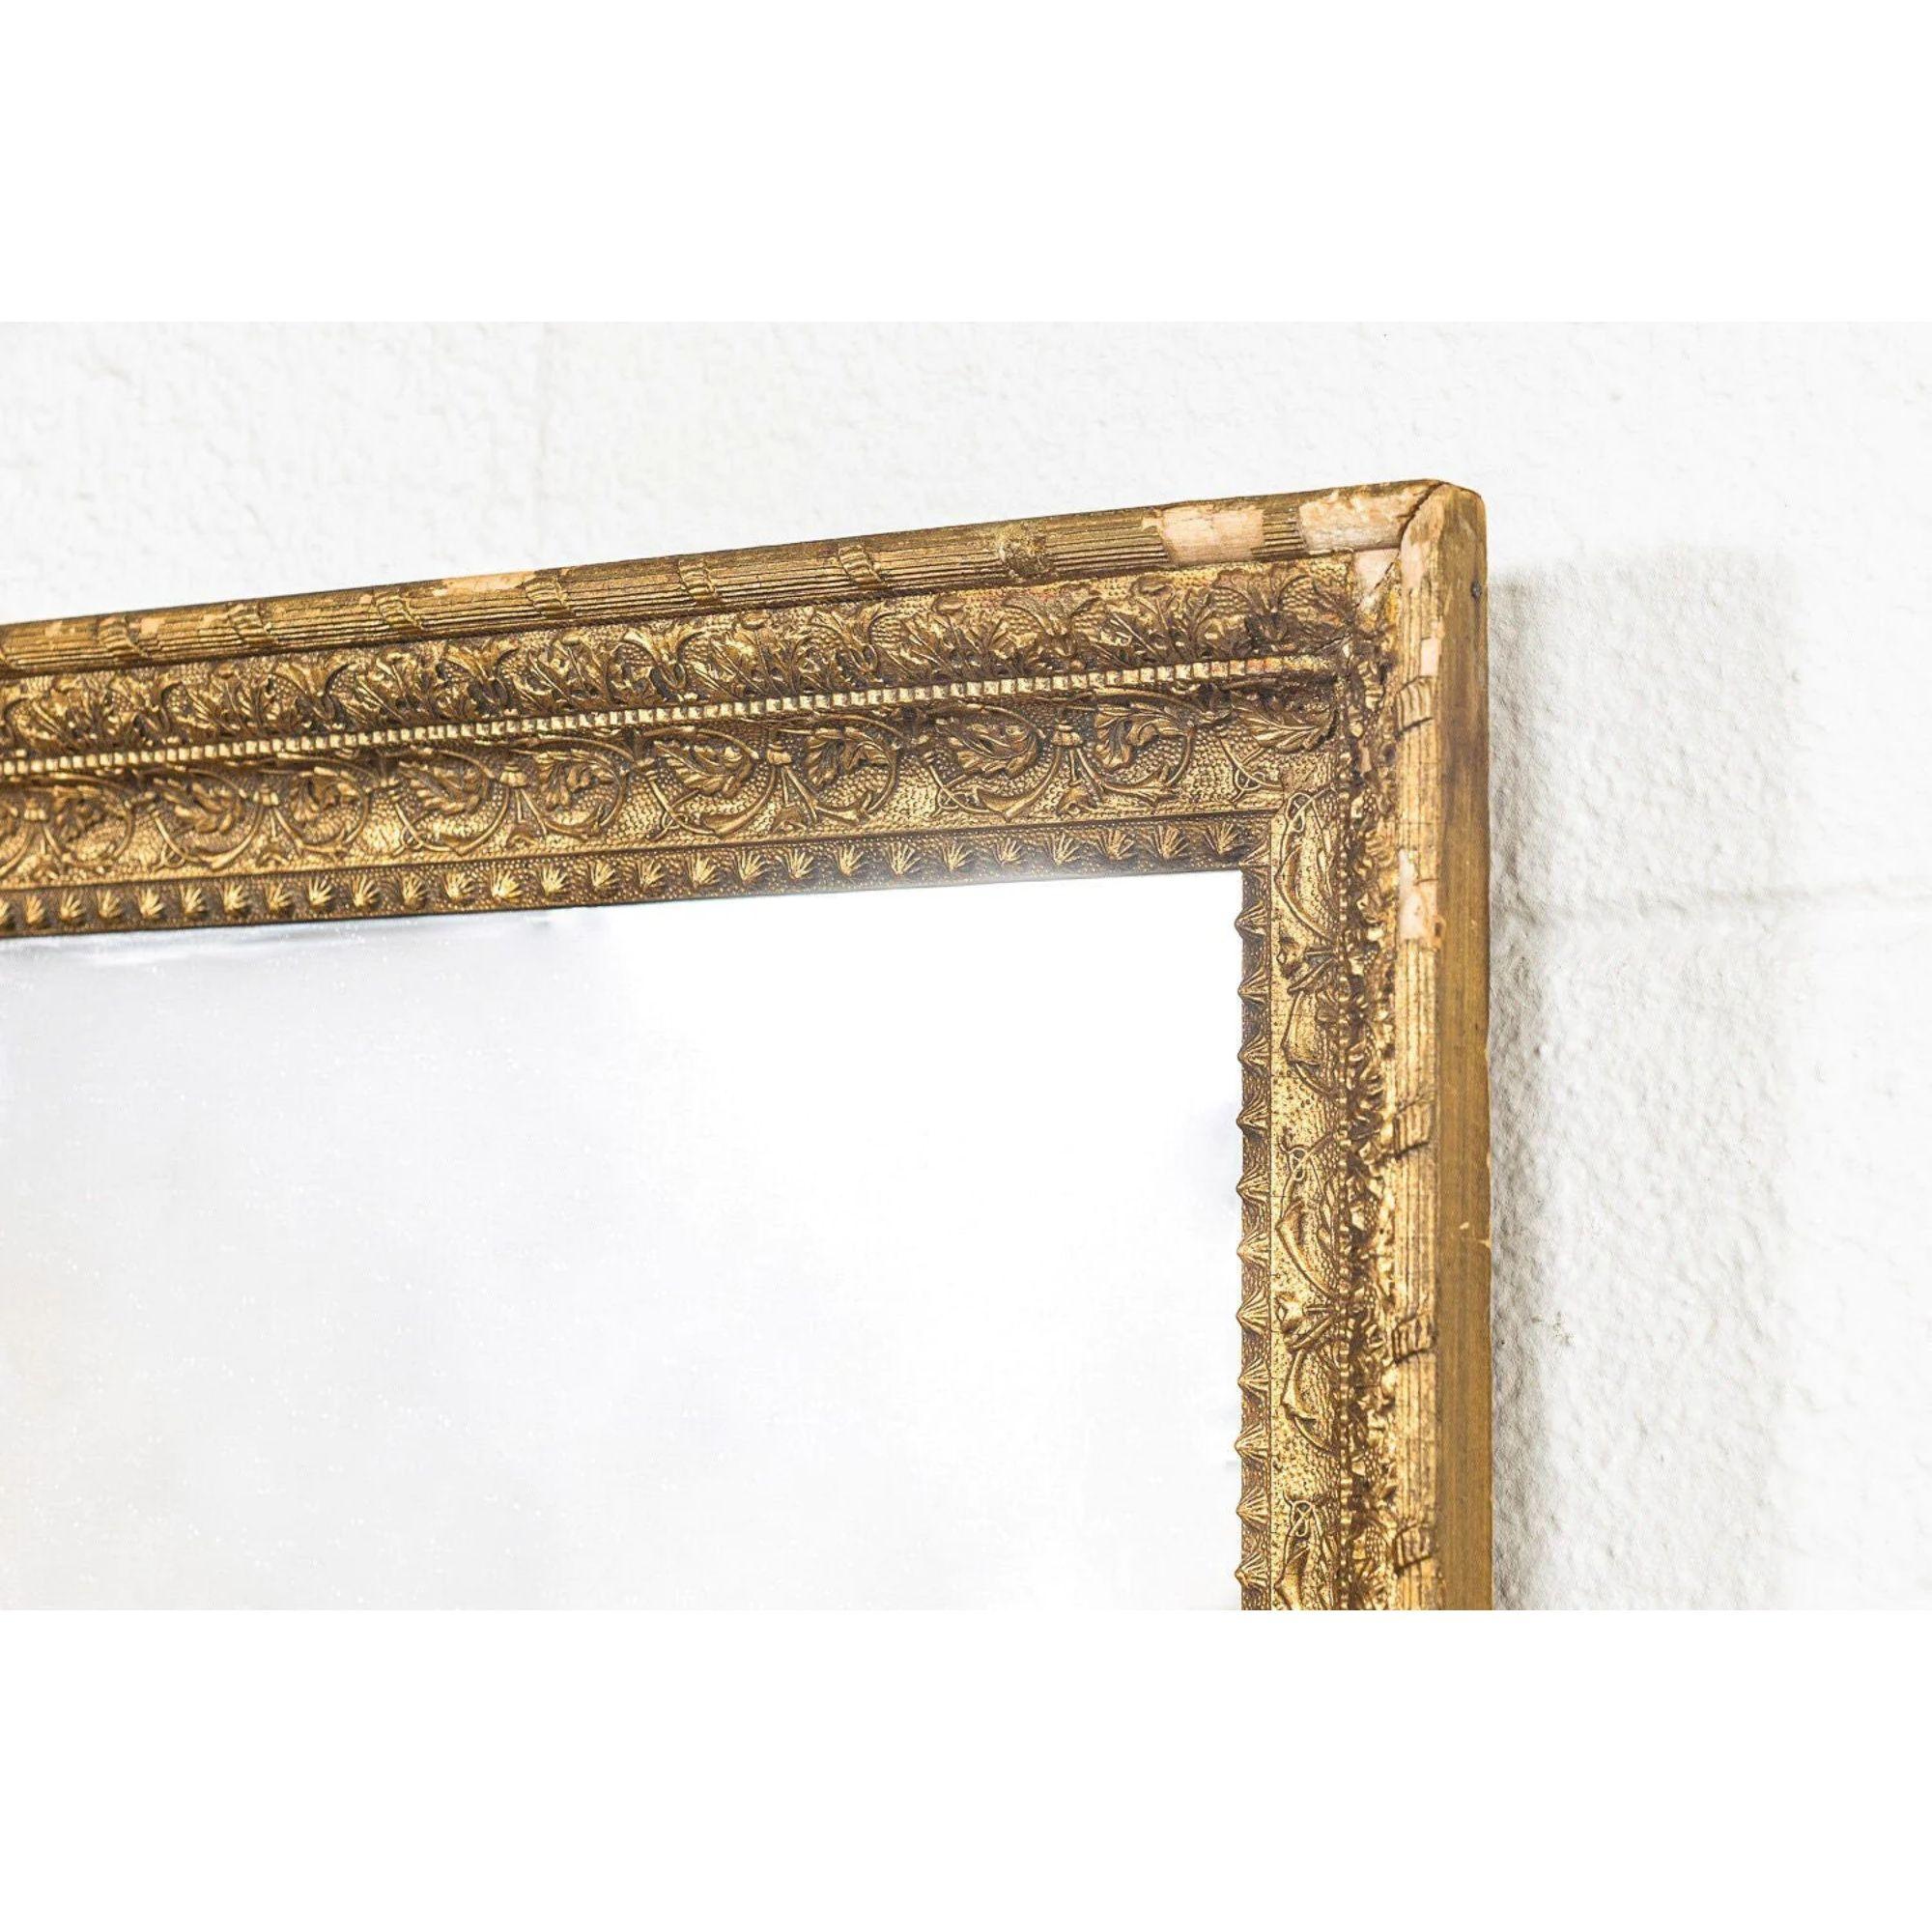 Rustic Vintage Antique Ornate Gold Decorative Hanging Wall Mirror For Sale